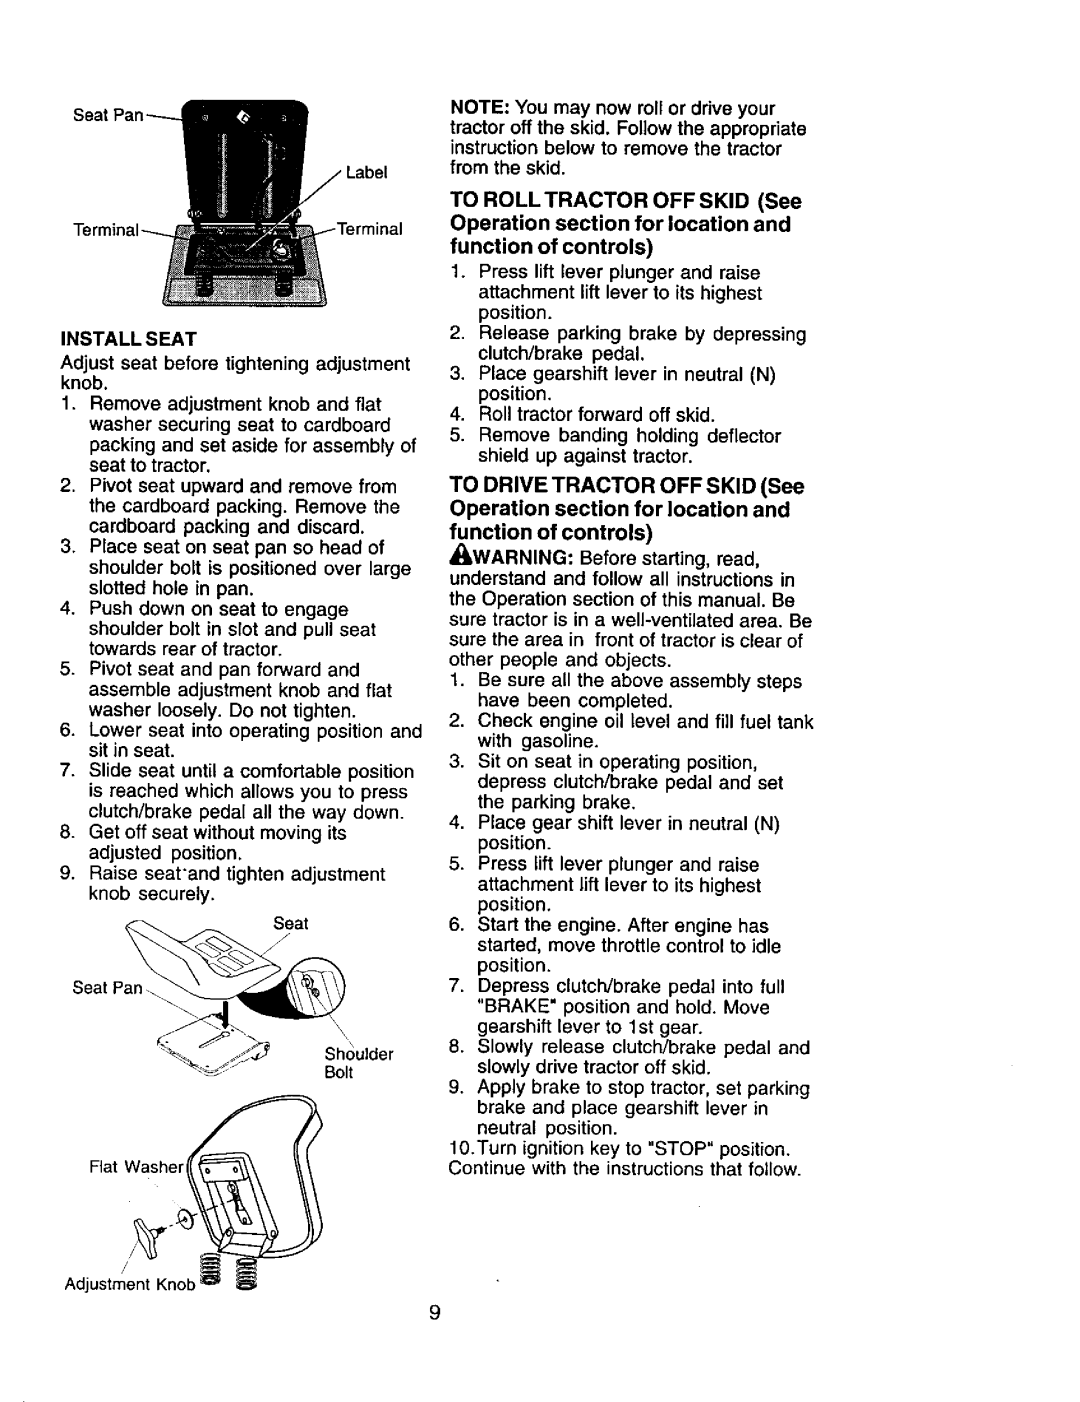 Craftsman 917.271554 owner manual Install Seat, TO ROLLTRACTOR OFFSKID See, function of controls 